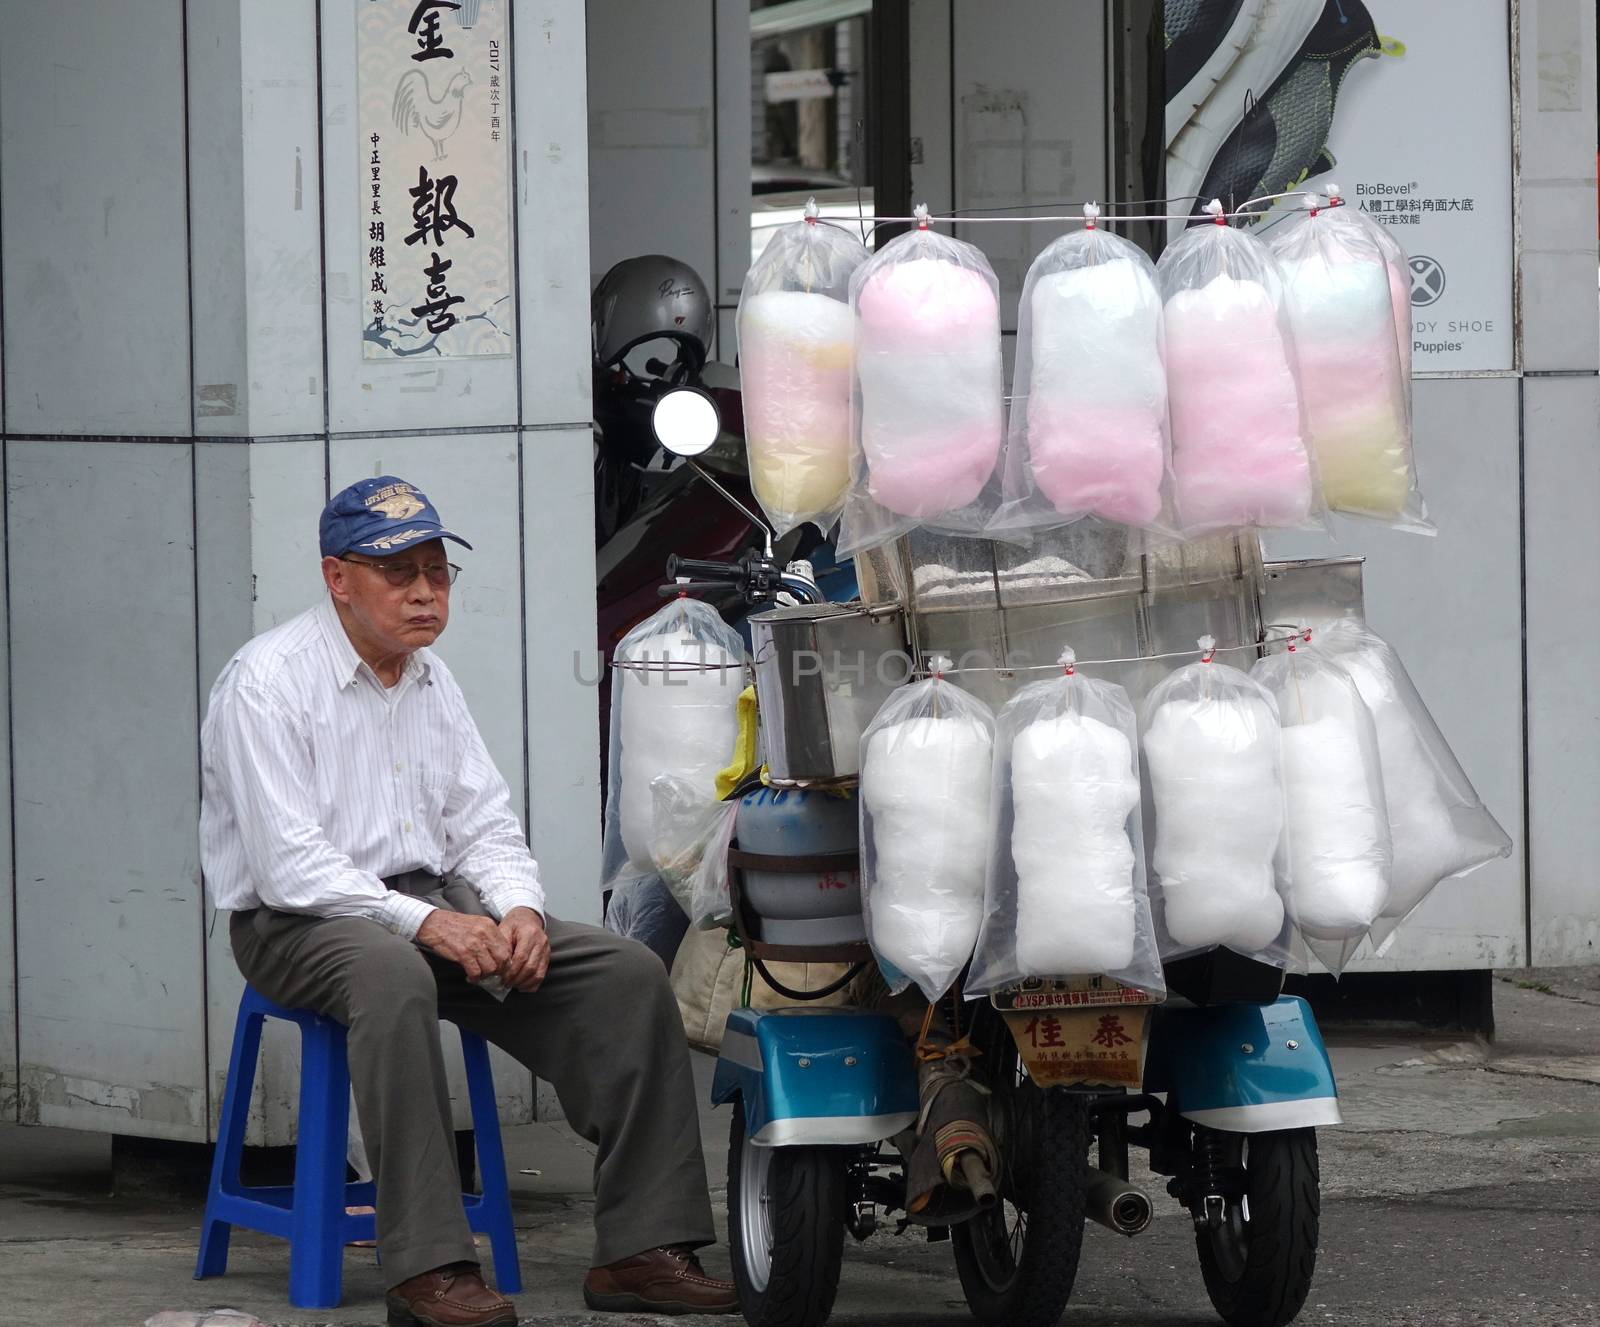 KAOHSIUNG, TAIWAN -- FEBRUARY 16, 2018: An elderly man sells home-made cotton candy from three wheel scooter.
